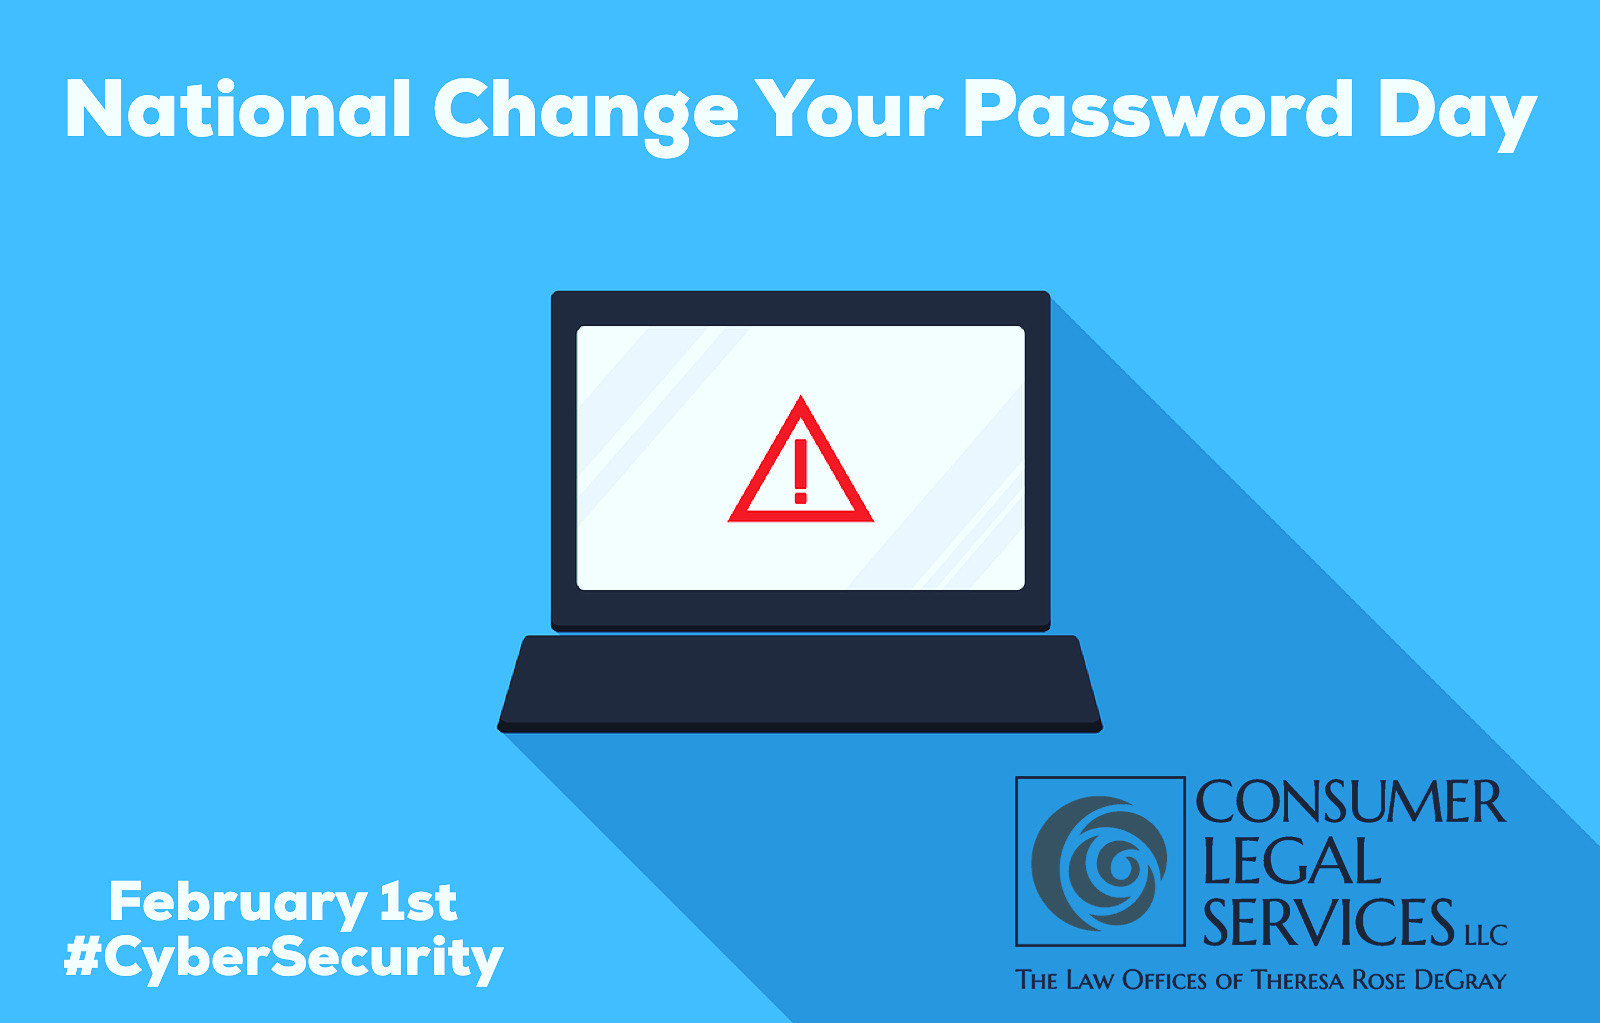 National Change Your Password Day Consumer Legal Services LLC